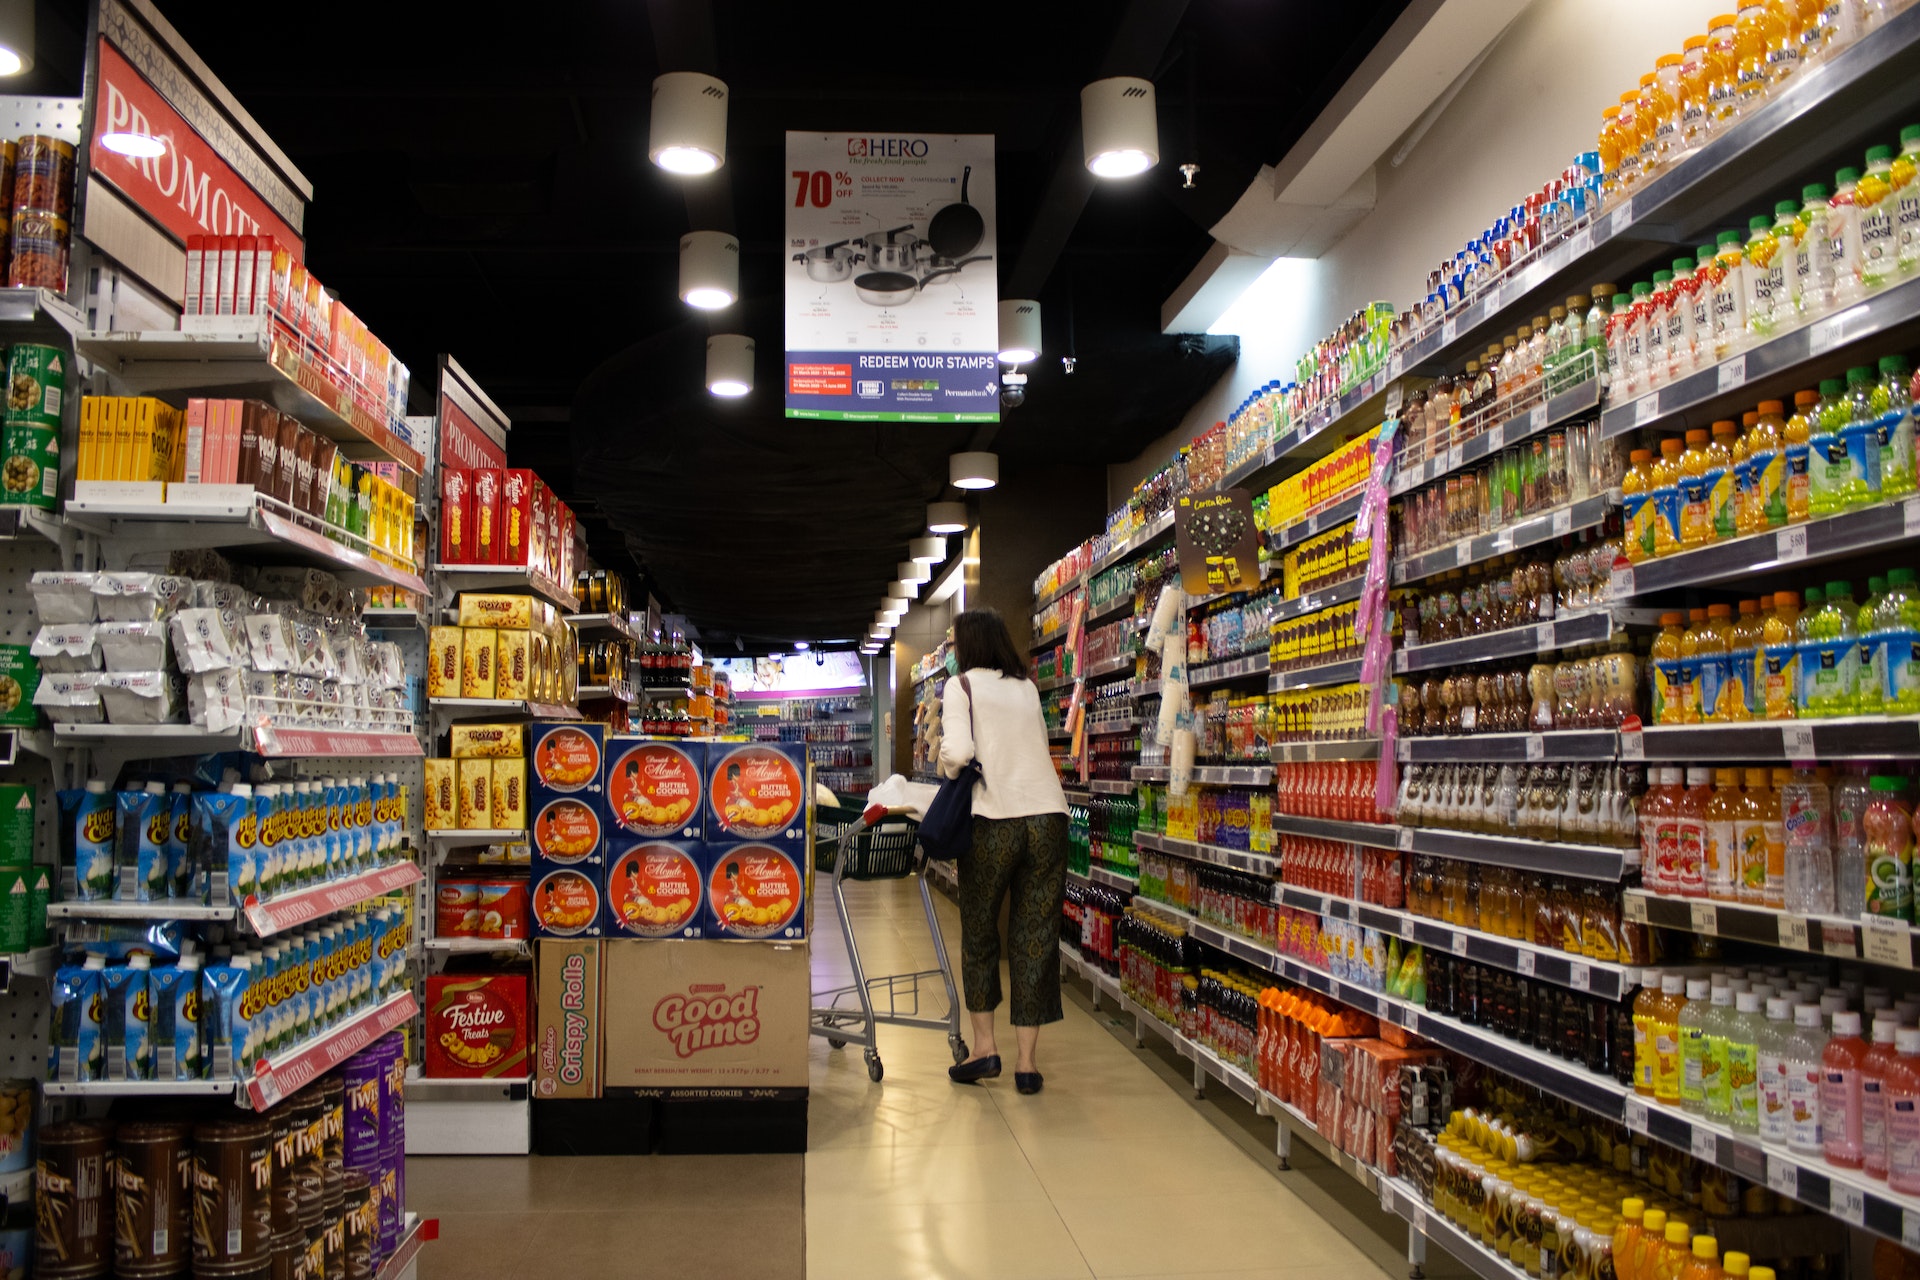 A grocery store | Source: Pexels